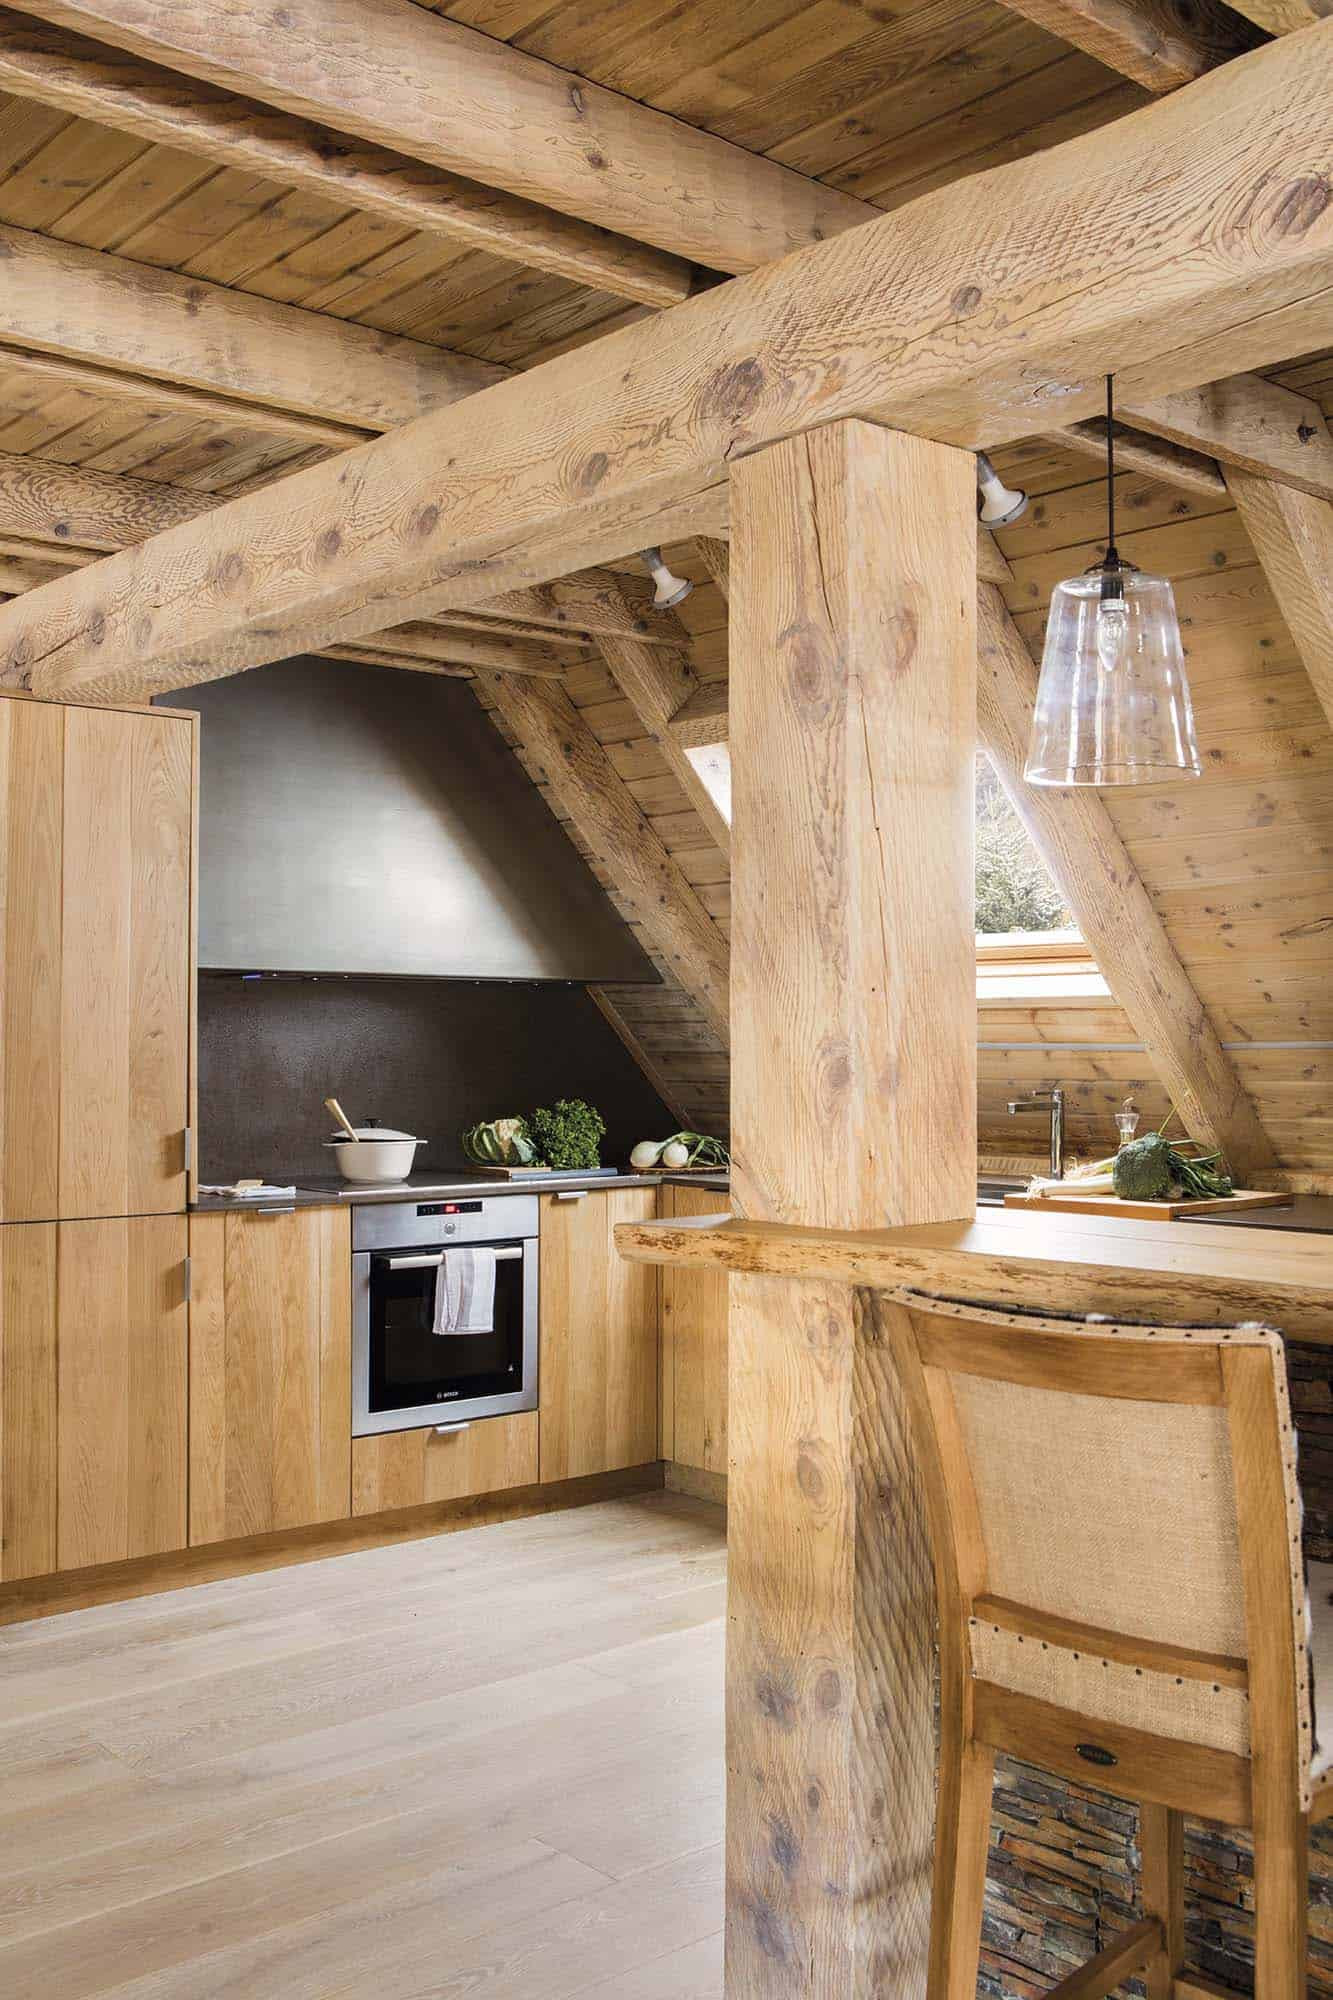 Rustic Log Cabin Kitchens
 Charming rustic cabin for winter aways in the Pyrenees